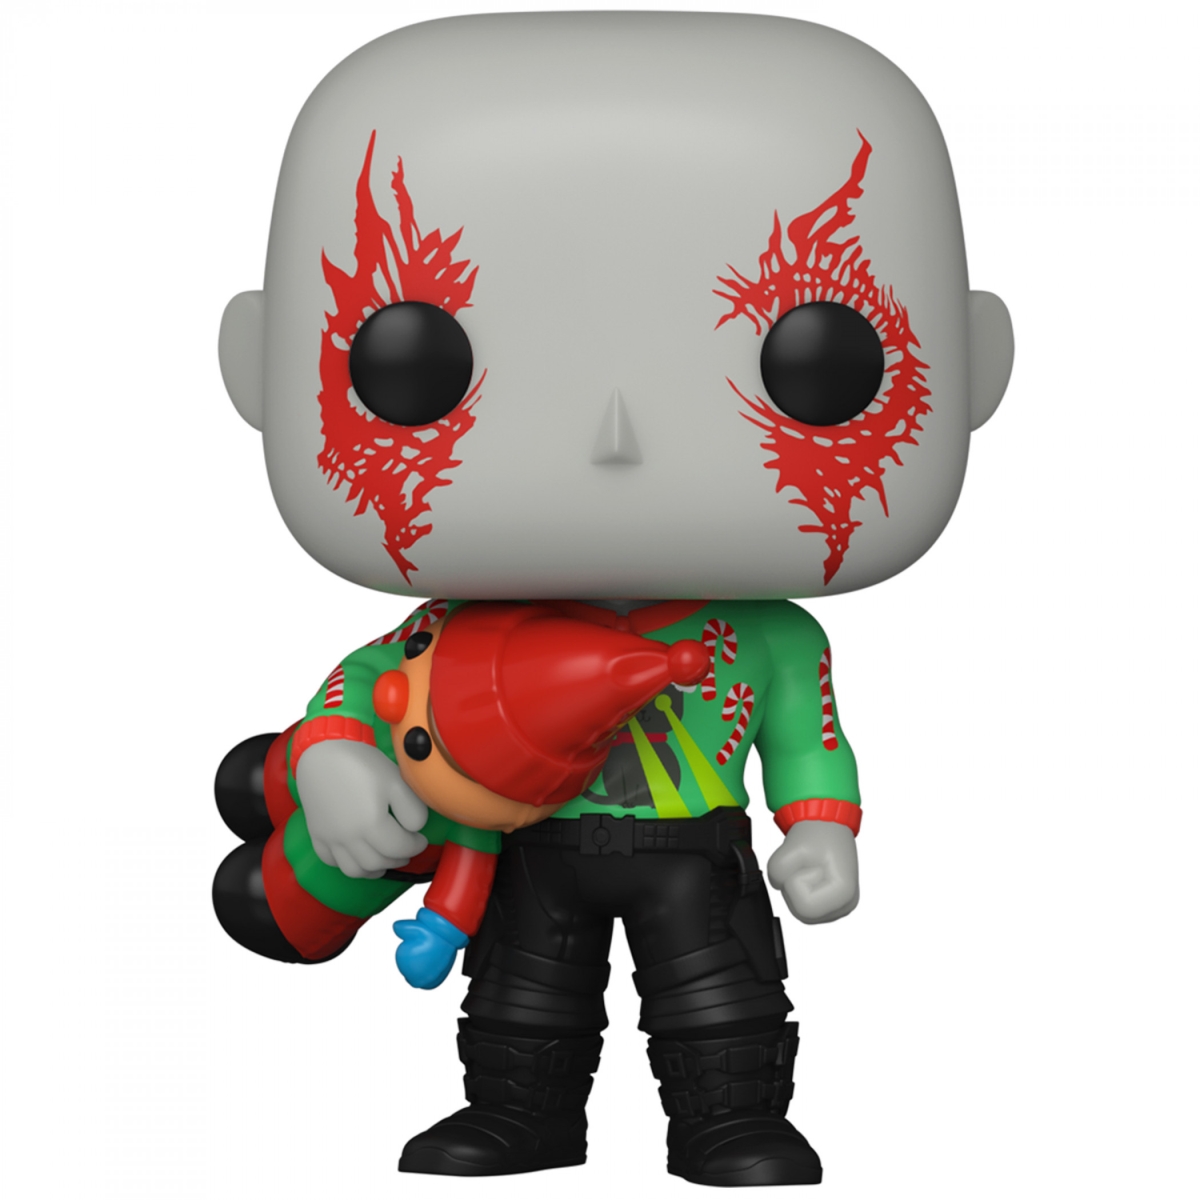 Picture of Drax the Destroyer 851724 Guardians of the Galaxy Holiday Drax Funko Pop Vinyl Figure